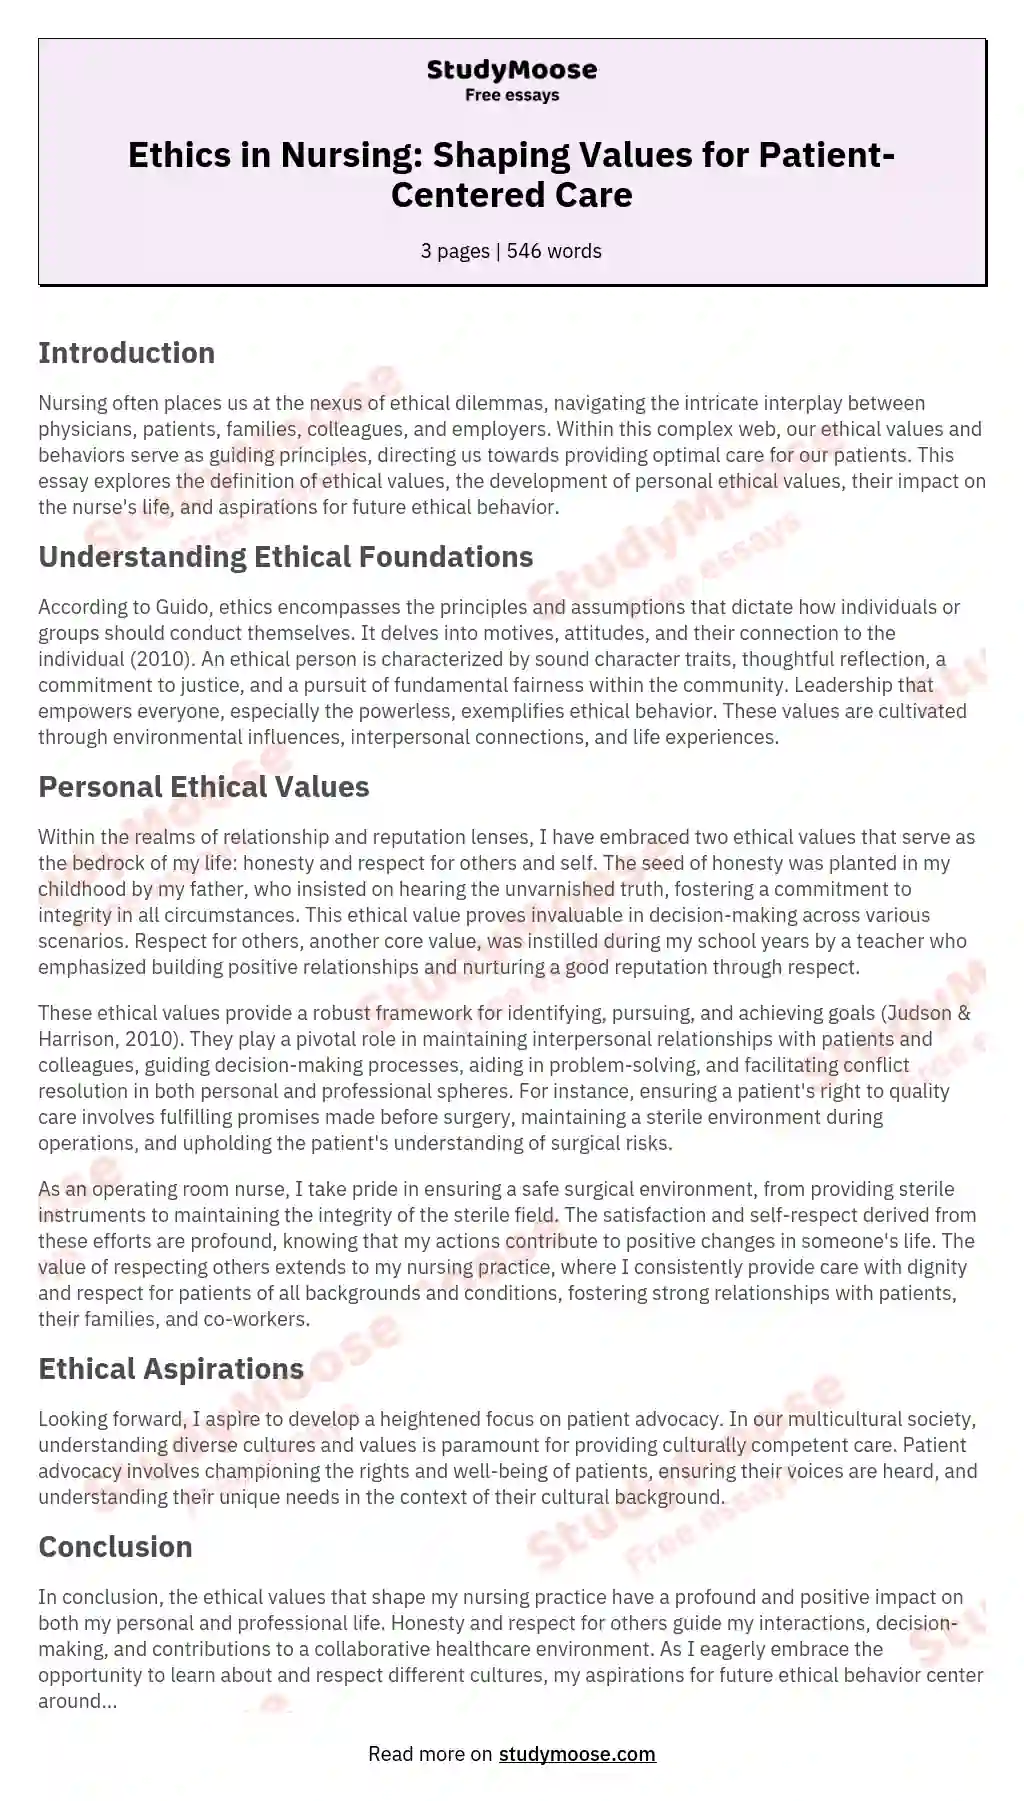 Ethics in Nursing: Shaping Values for Patient-Centered Care essay